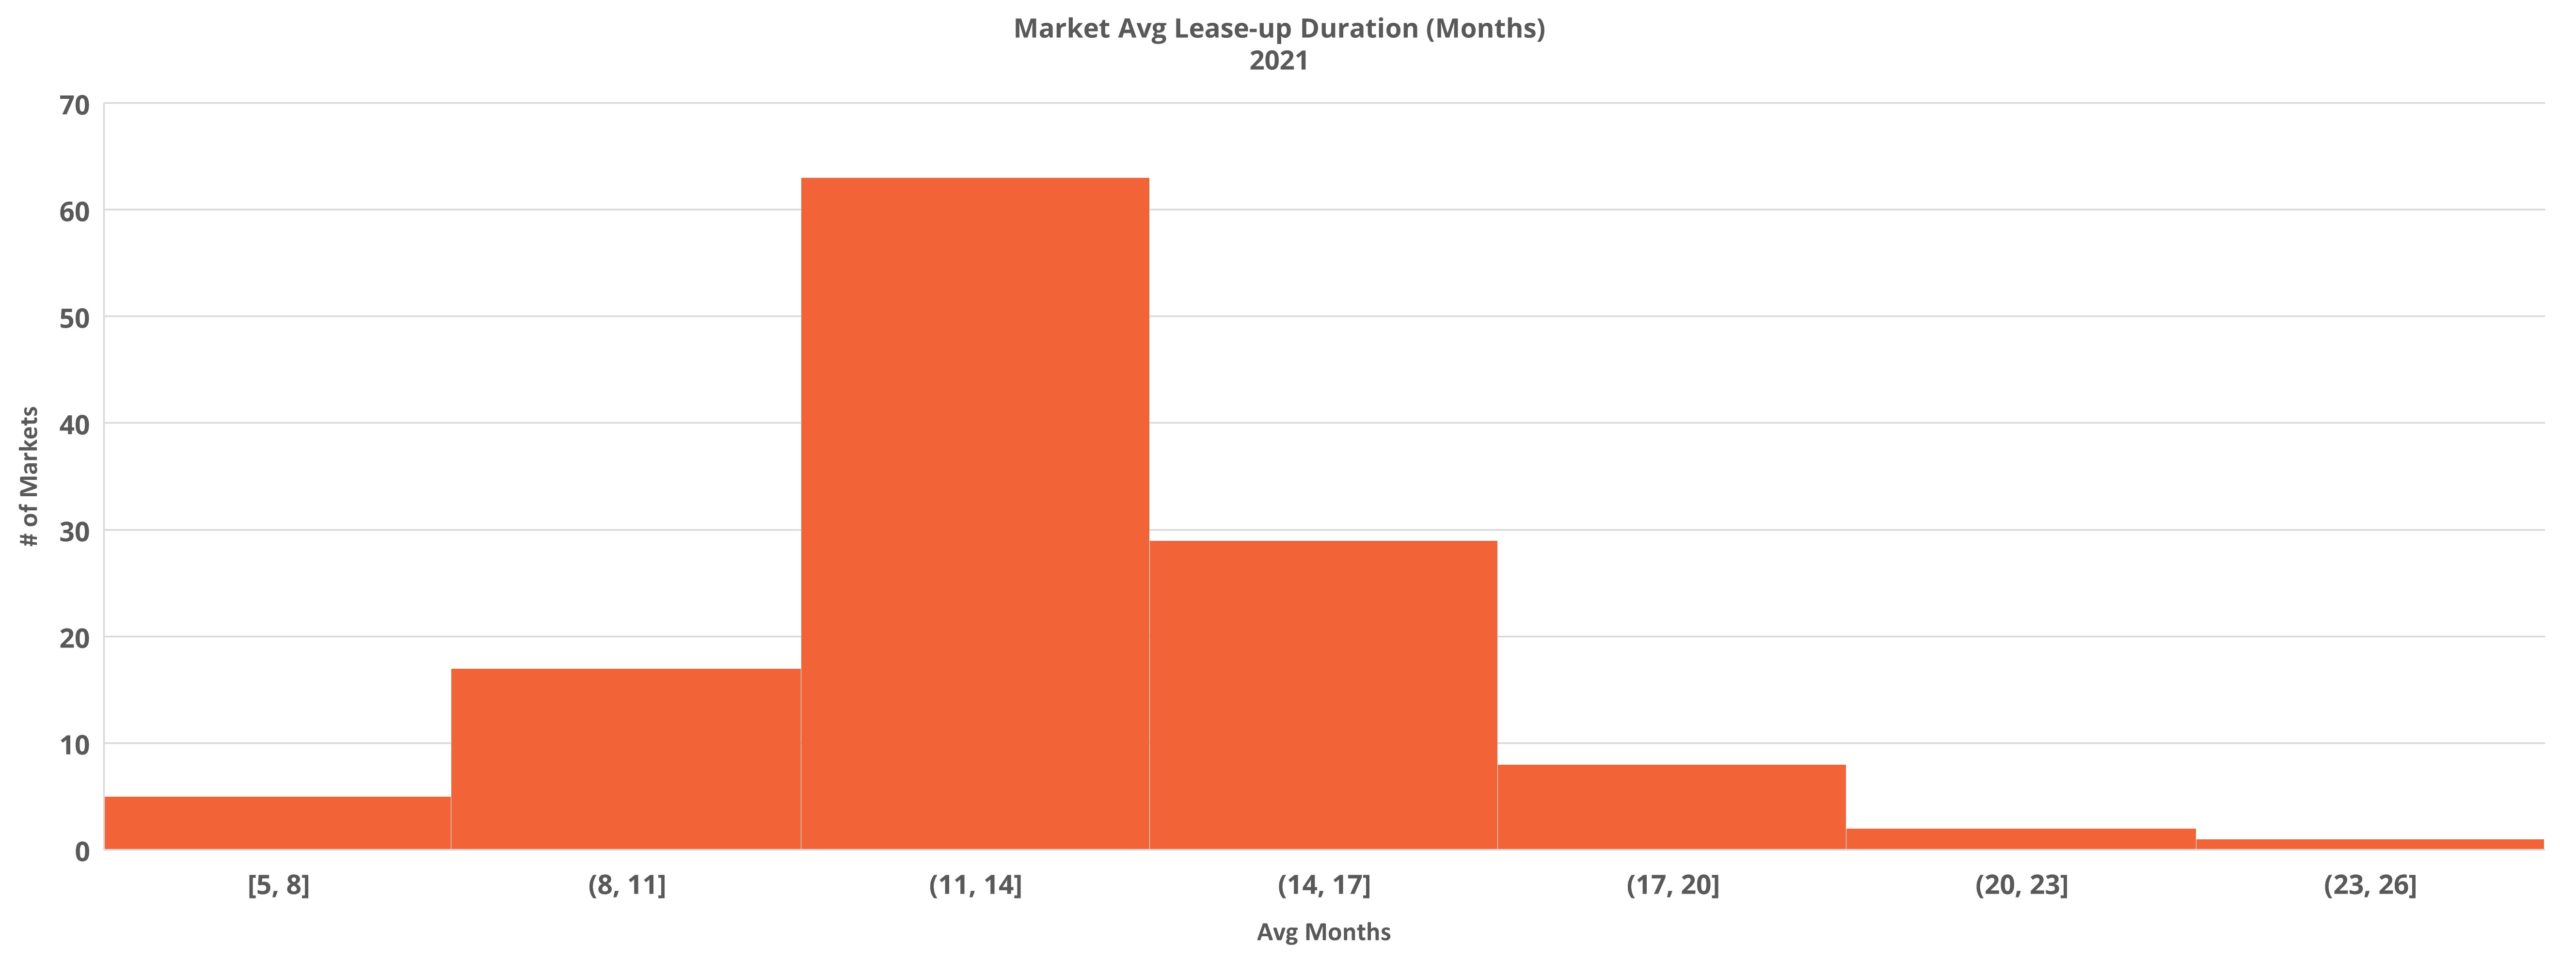 Market Avg Lease-up Duration (Months)